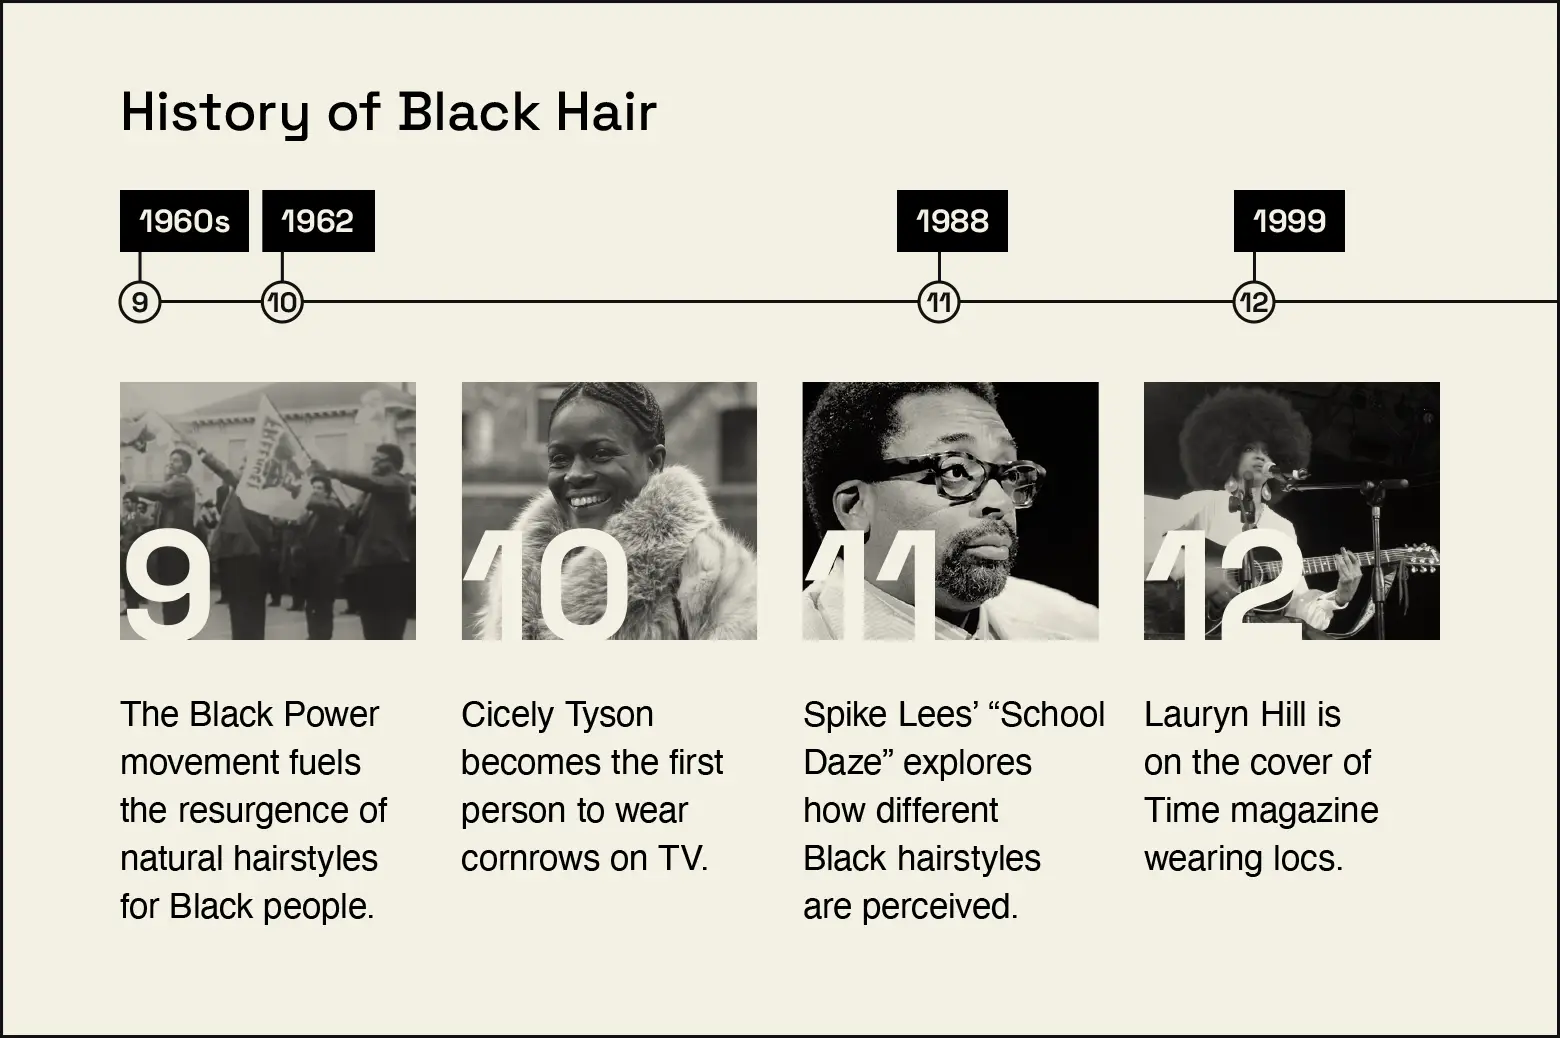 Timeline covers key moments in Black hair history regarding natural hair styles from the 1960s to 1999.